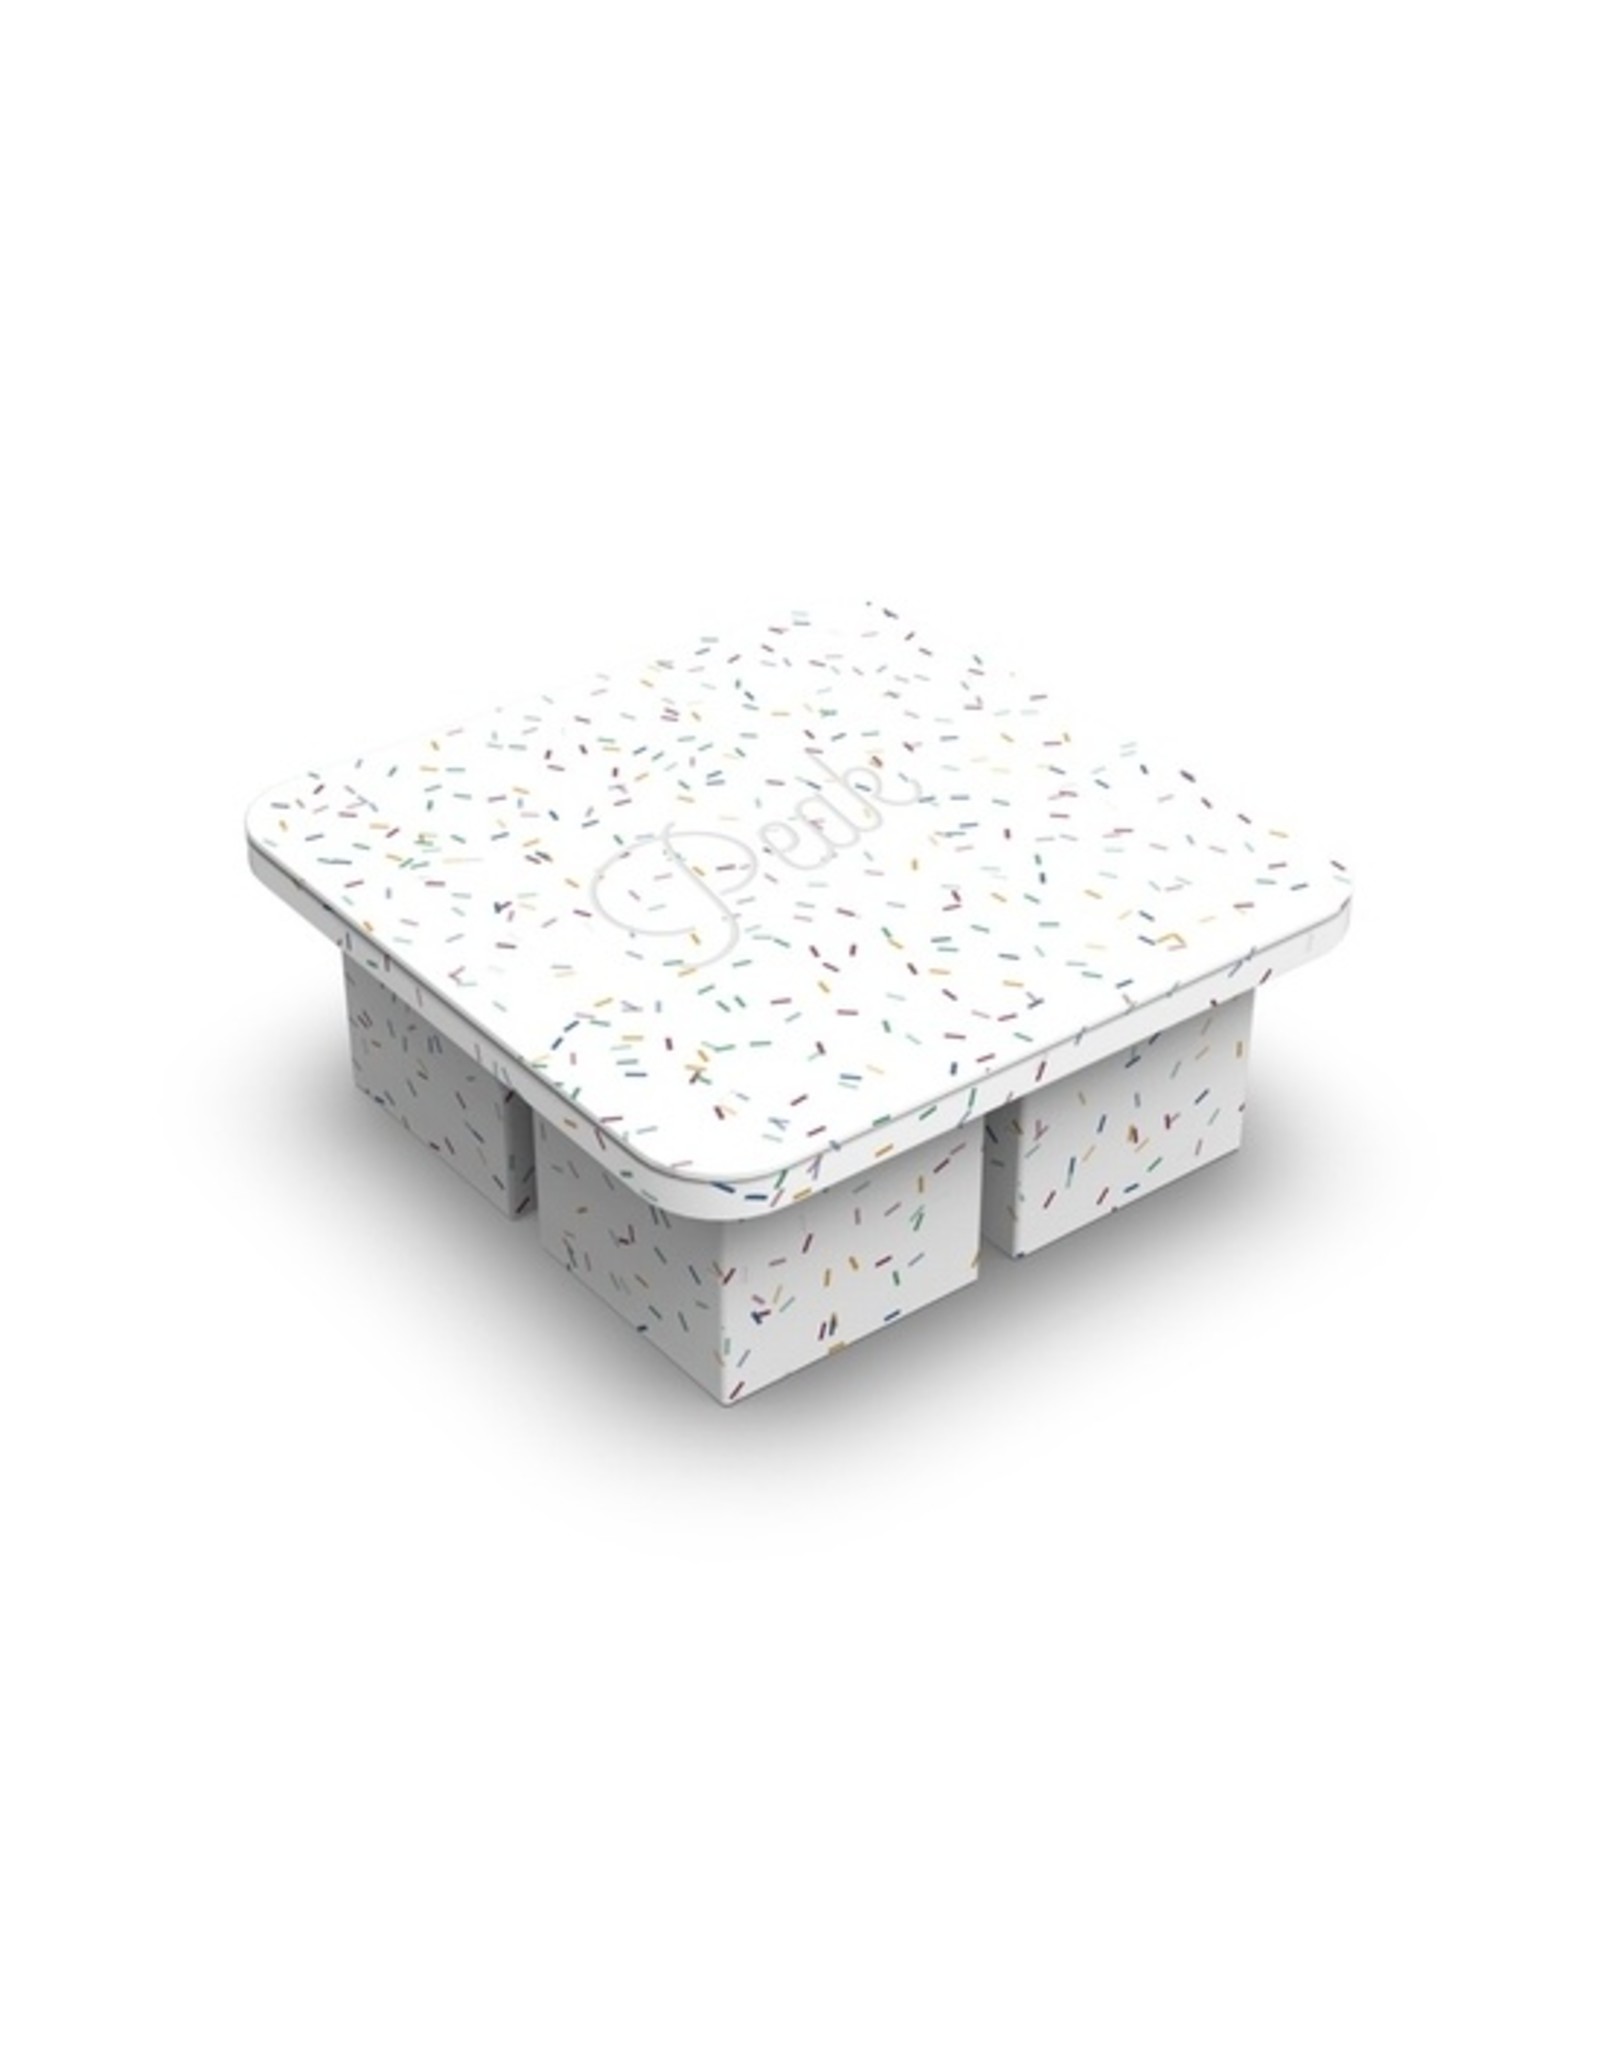 https://cdn.shoplightspeed.com/shops/640686/files/35335418/1600x2048x2/extra-large-ice-cube-tray-speckled-white.jpg